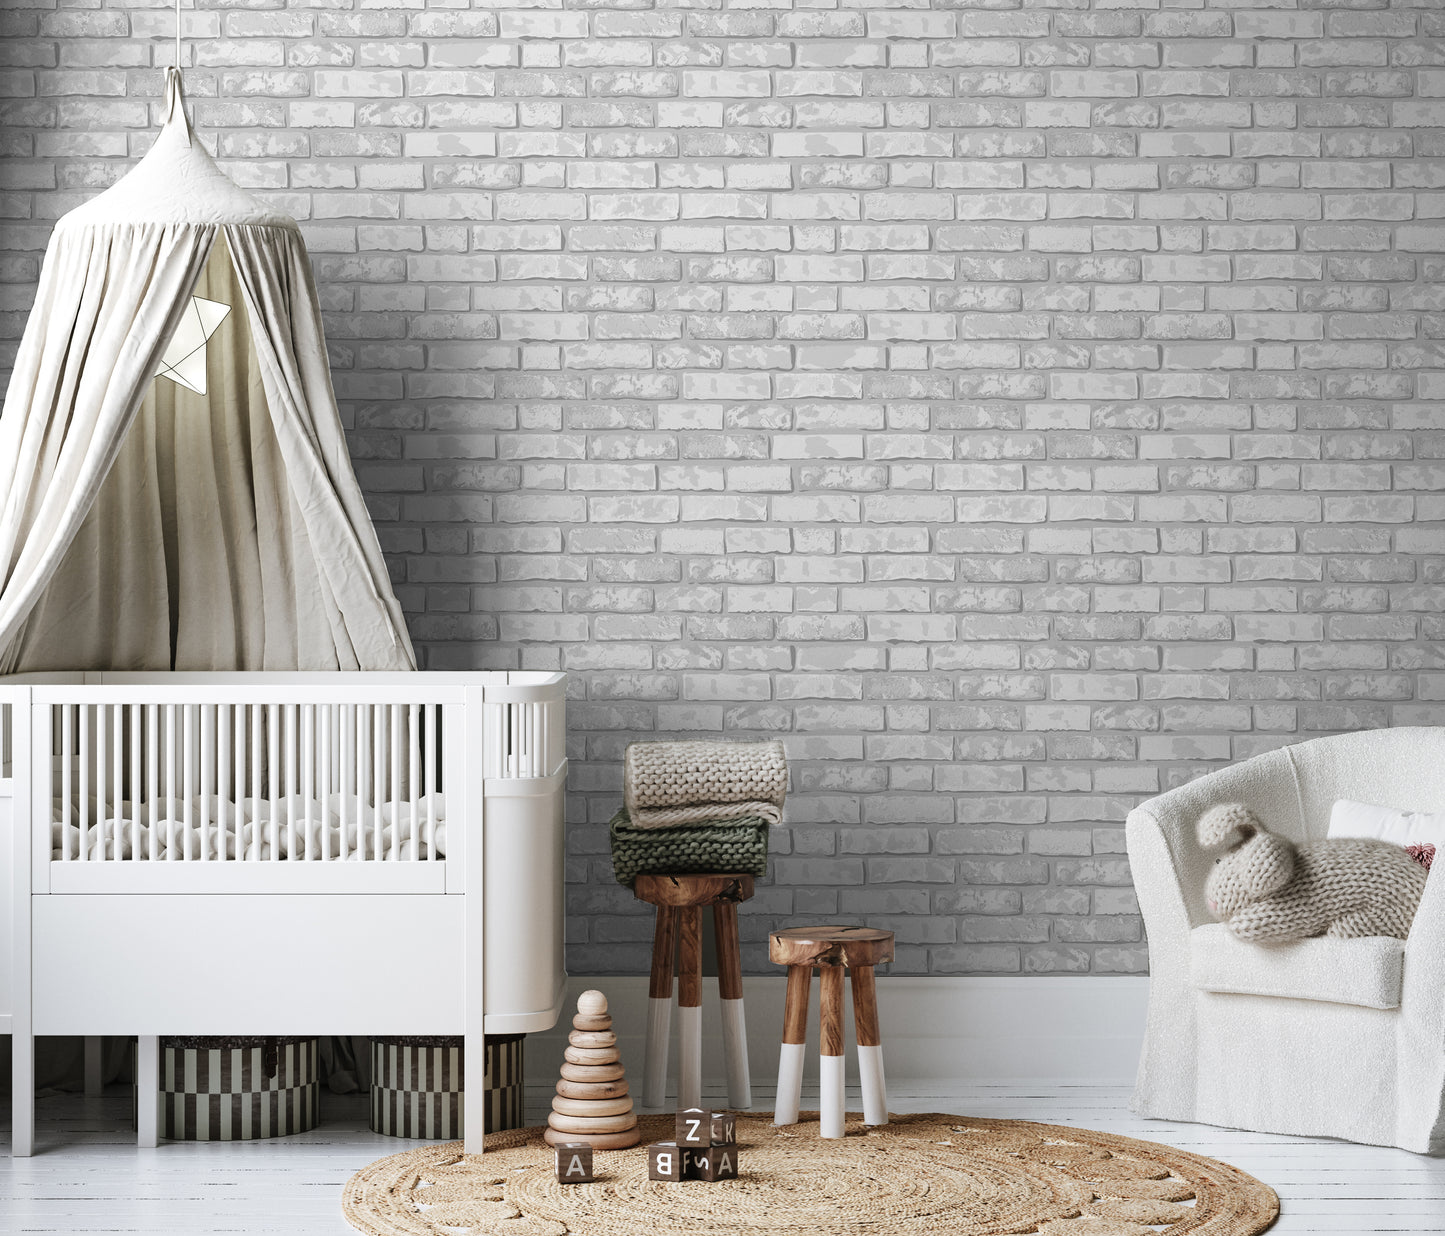 Whitewashed Brick Removable Peel And Stick Wallpaper